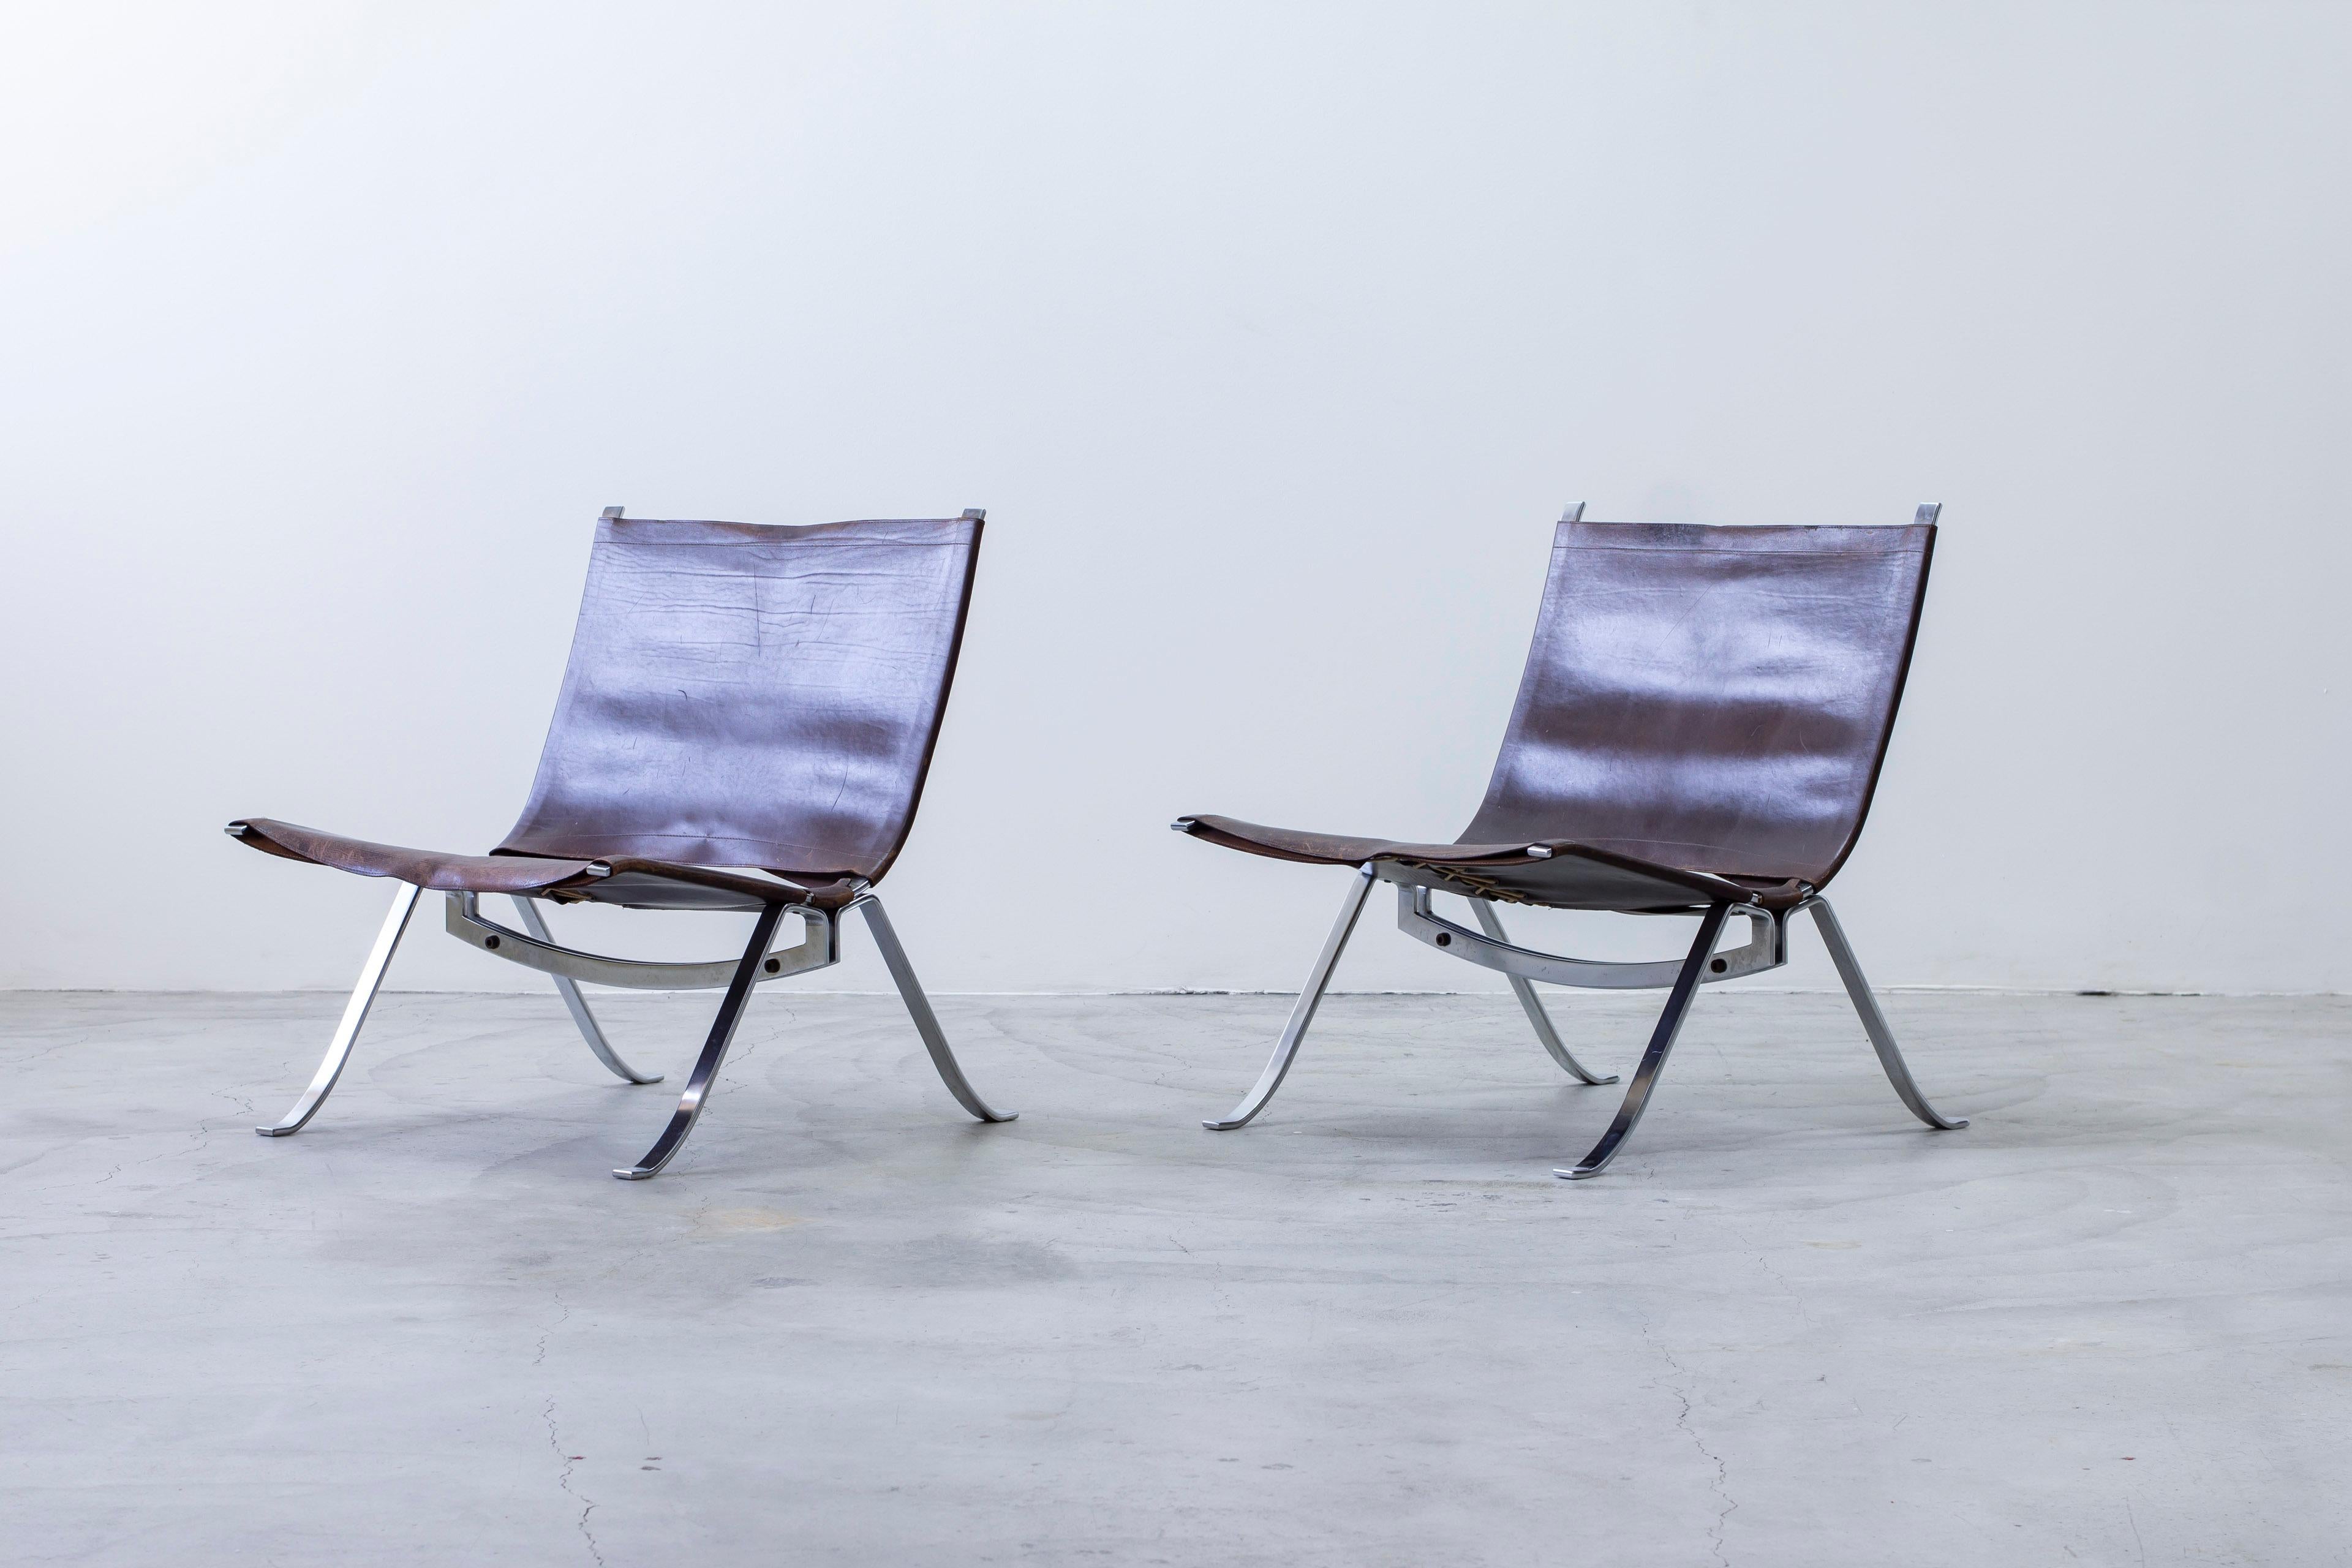 Pair of lounge chairs designed by Preben Fabricius. Produced by Arnold Exclusiv around 1972. Very well made and only in production during a brief while. Made from thick chromed steel and deep brown core leather stitched together with thick rope in